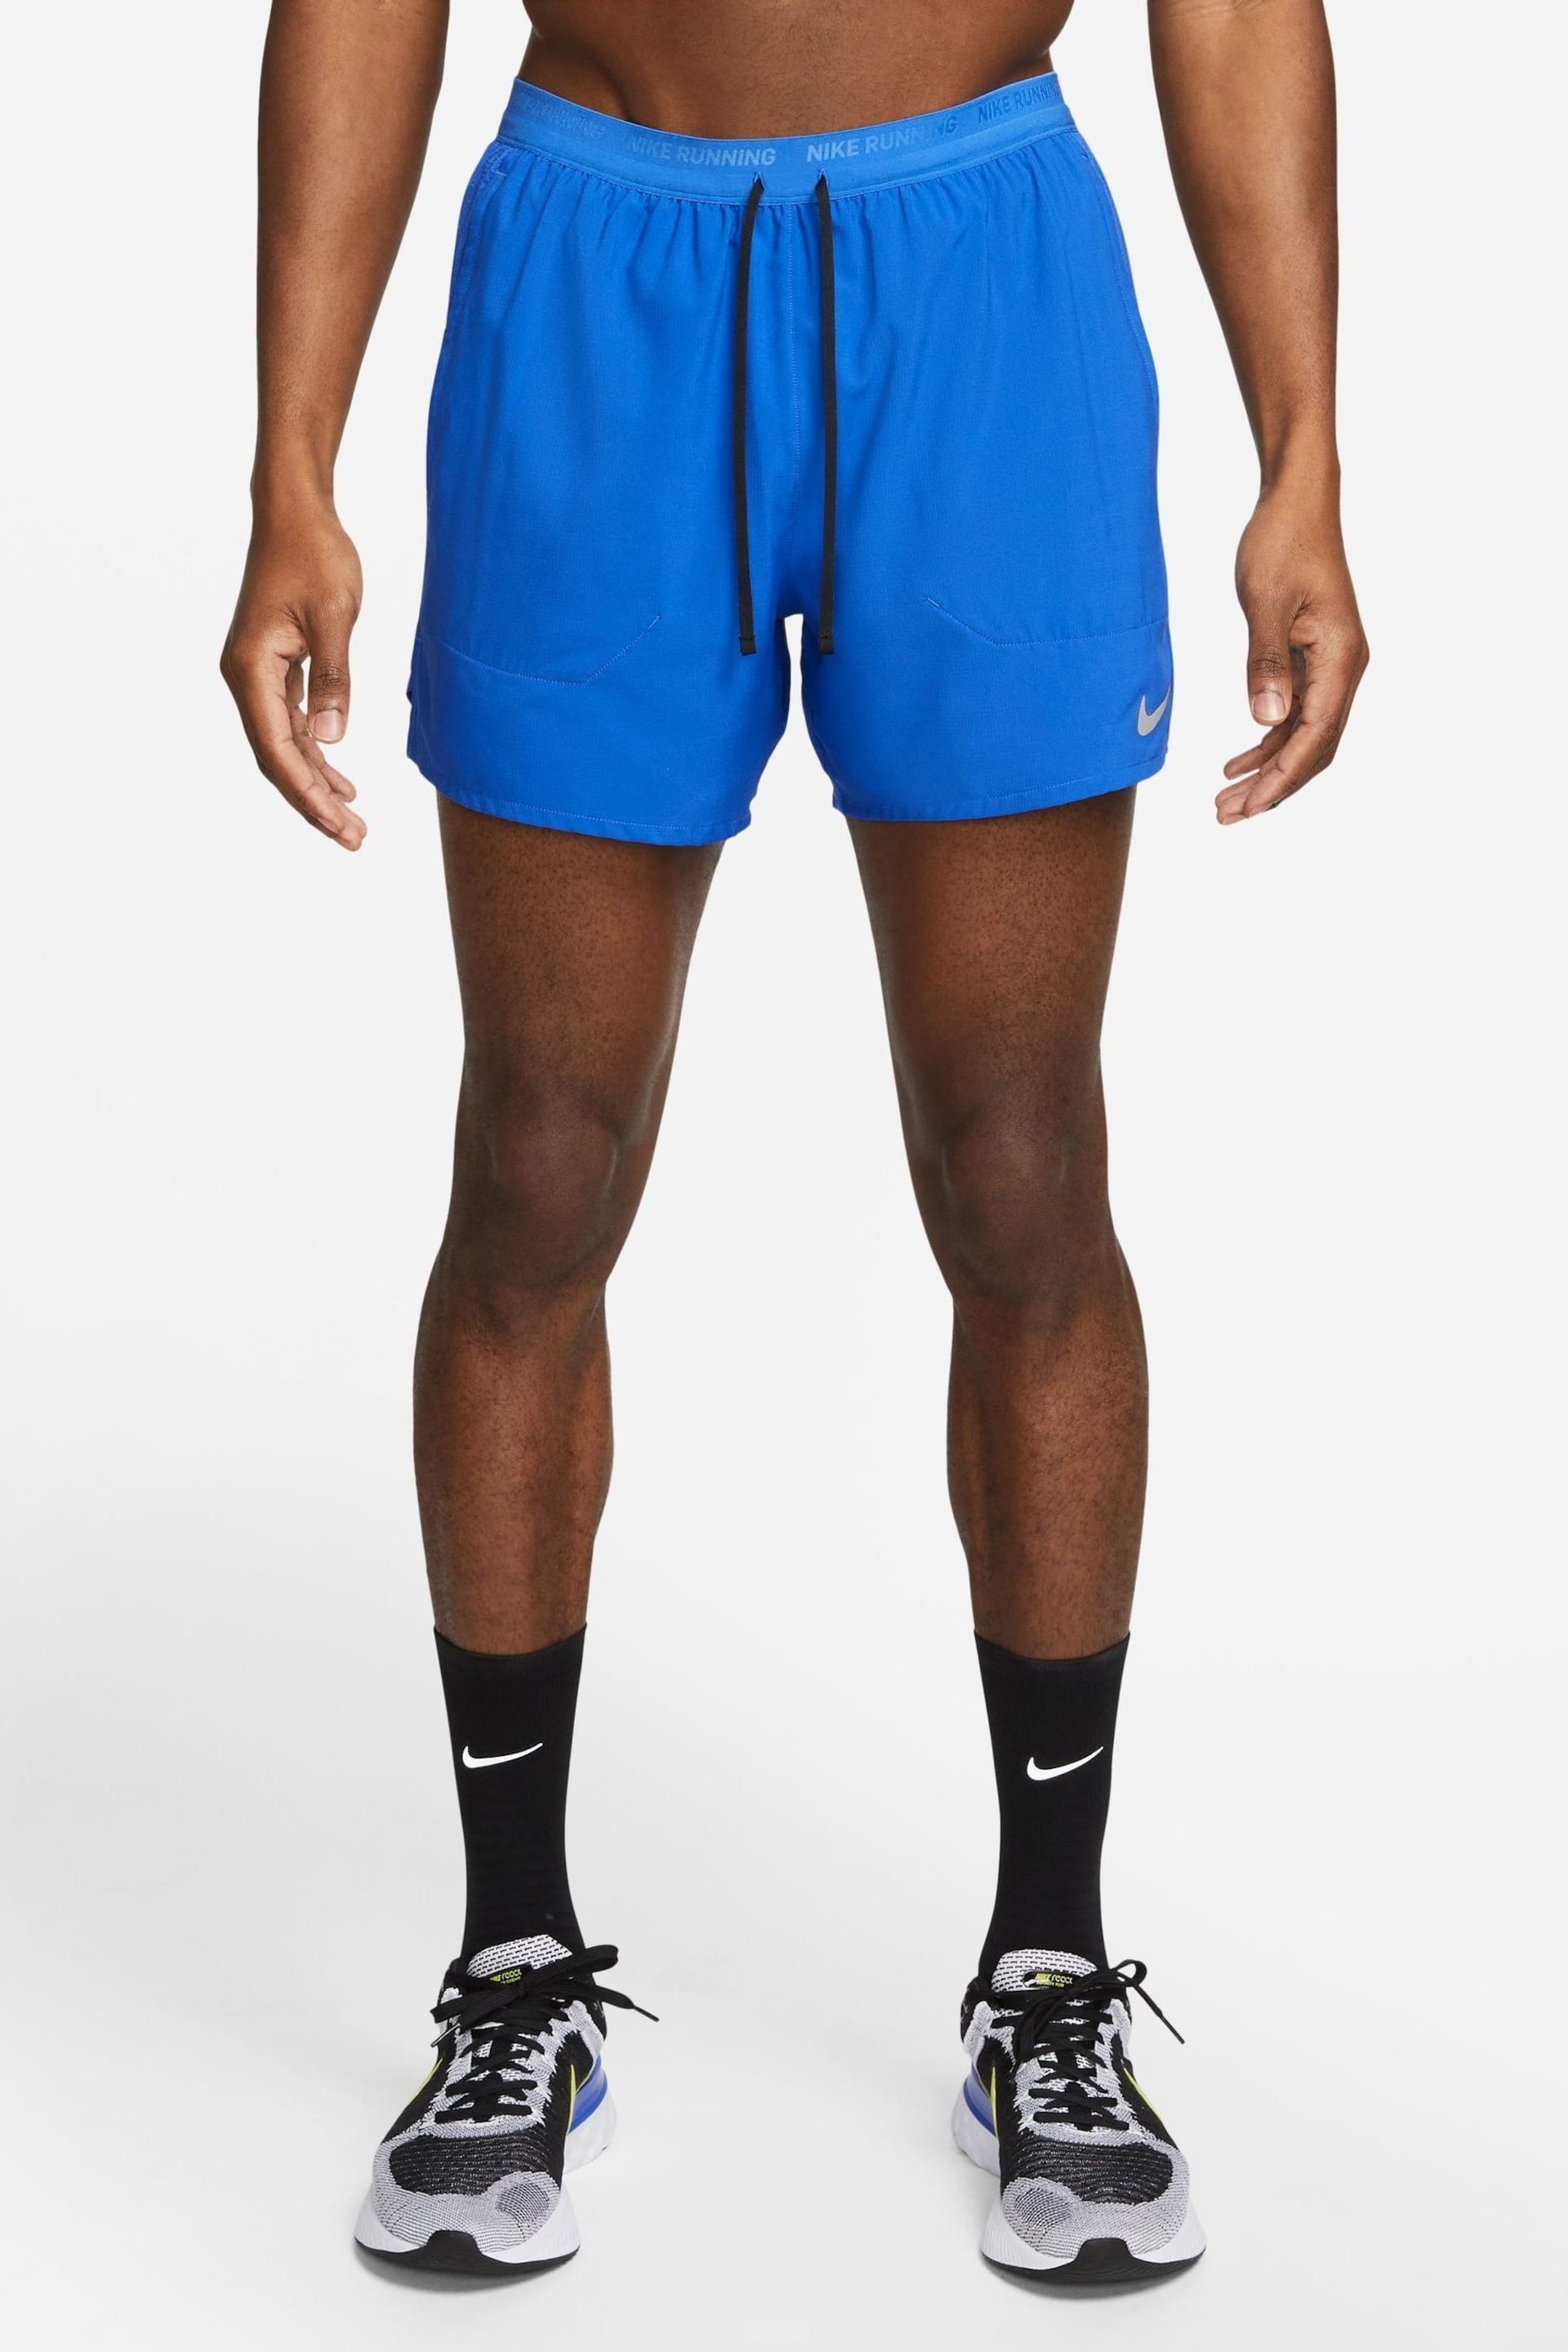 Nike Blue Dri-FIT Stride 5 Inch Running Shorts - Image 1 of 16